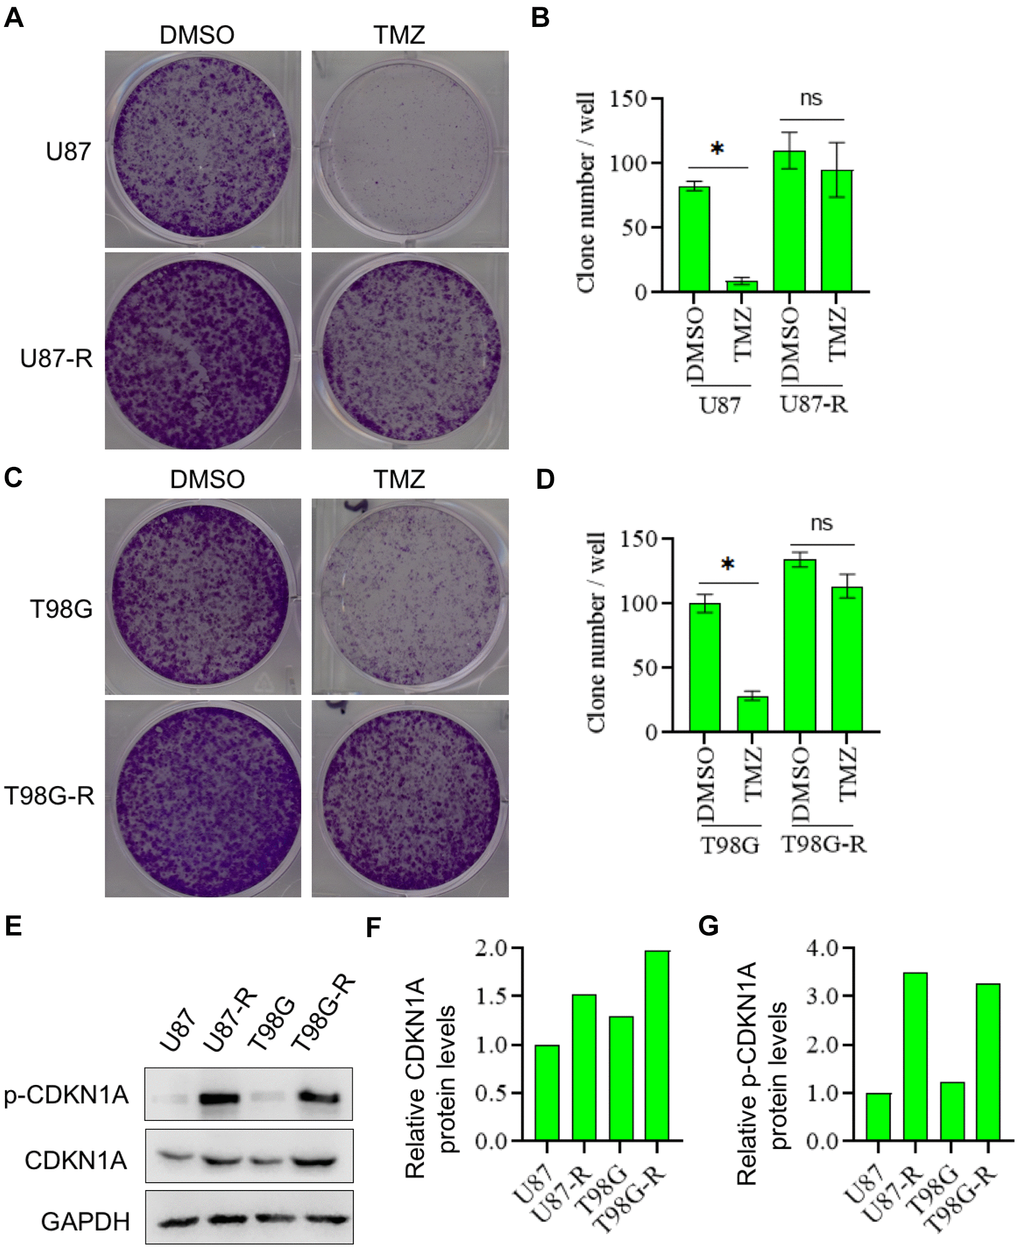 CDKN1A and p-CDKN1A were highly expressed in TMZ-resistant glioma cells. (A, B) Compared with U87 cells, U87-R cells were significantly more resistant to the therapy of TMZ by using the colony formation assay. (C, D) Compared with T98G cells, T98G-R cells were significantly more resistant to the therapy of TMZ by using the colony formation assay. (E–G) Compared with U87 and T98G cells, the protein expression levels of CDKN1A and p-CDKN1A were significantly higher in U87-R and T98G-R cells, respectively. The results were presented as means ± SD (n = 3 for each panel). Statistical significance was concluded at *P 